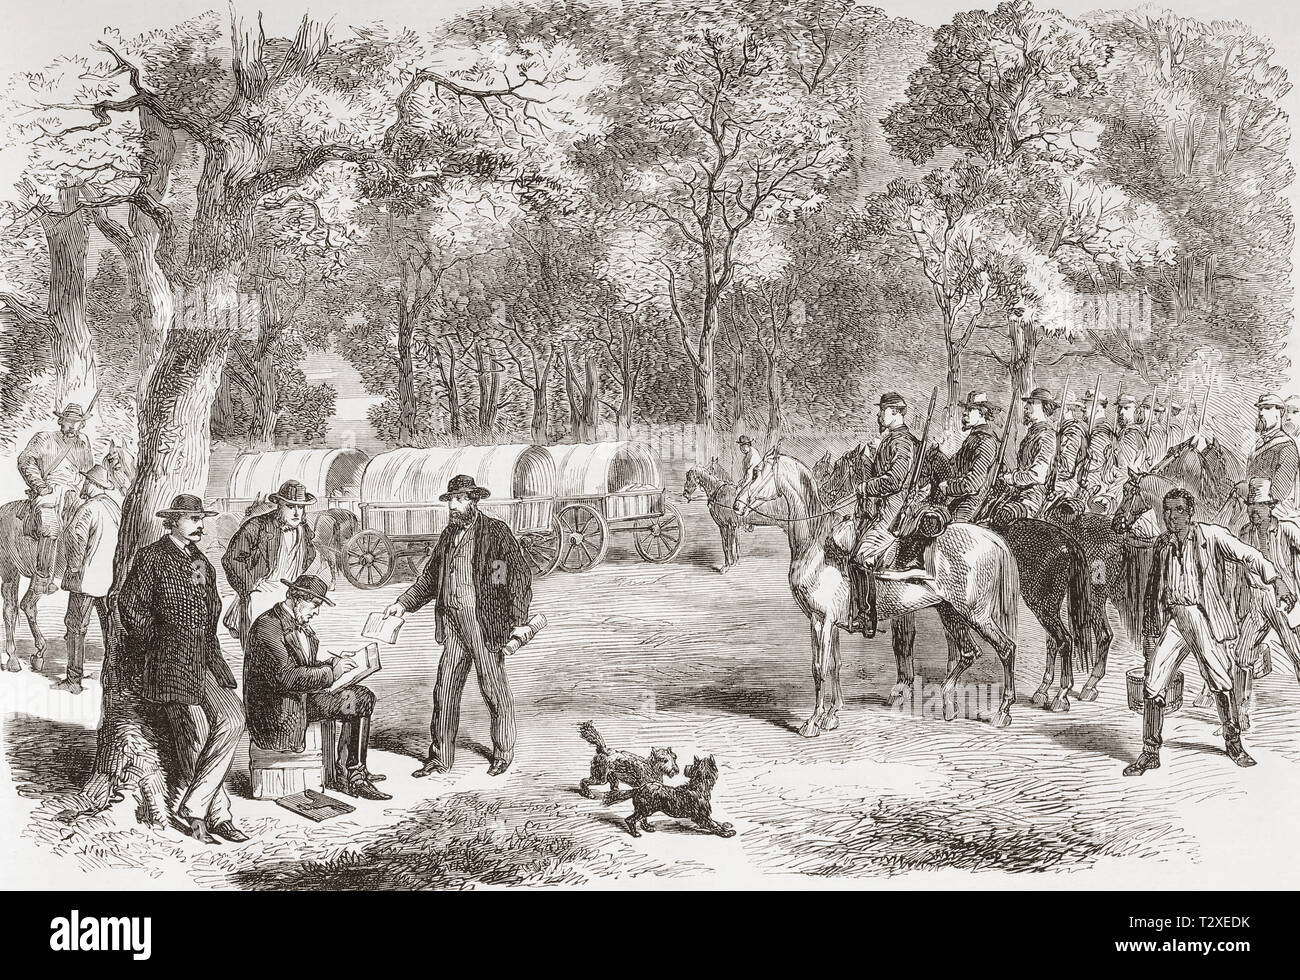 The last days of the Confederate Government, the conclusion of the American Civil War.  Jefferson Davis sat at the roadside, signing papers which his secretary of state Mr. Benjamin is handing to him.  This was possibly the last official business carried out by the Confederate cabinet.  Jefferson Finis Davis, 1808 – 1889. American politician who served as the only President of the Confederate States from 1861 to 1865.  From The Illustrated London News, published 1865. Stock Photo